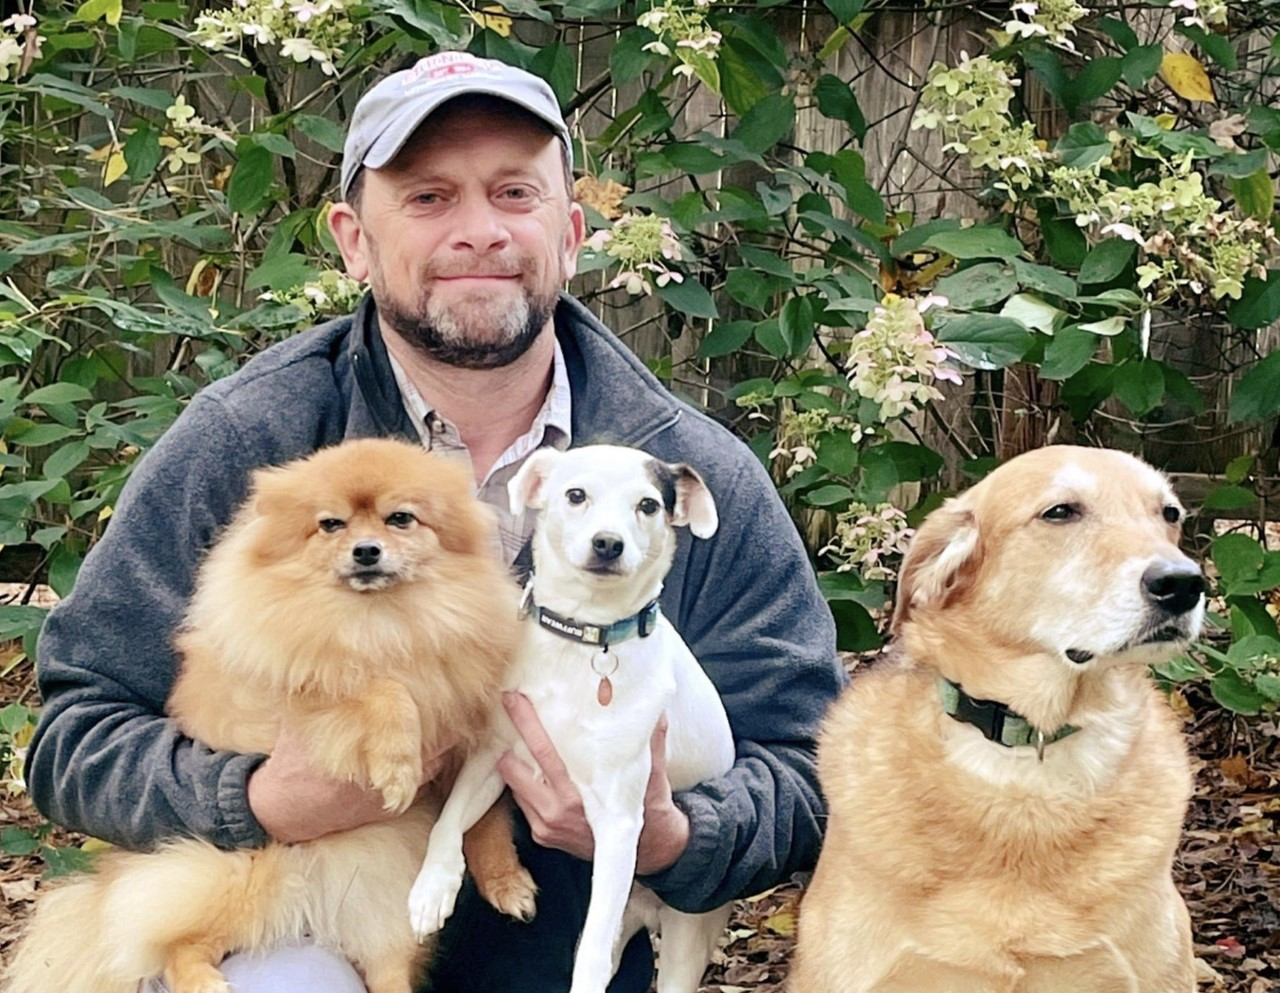 Brian Collins sits outside with three dogs